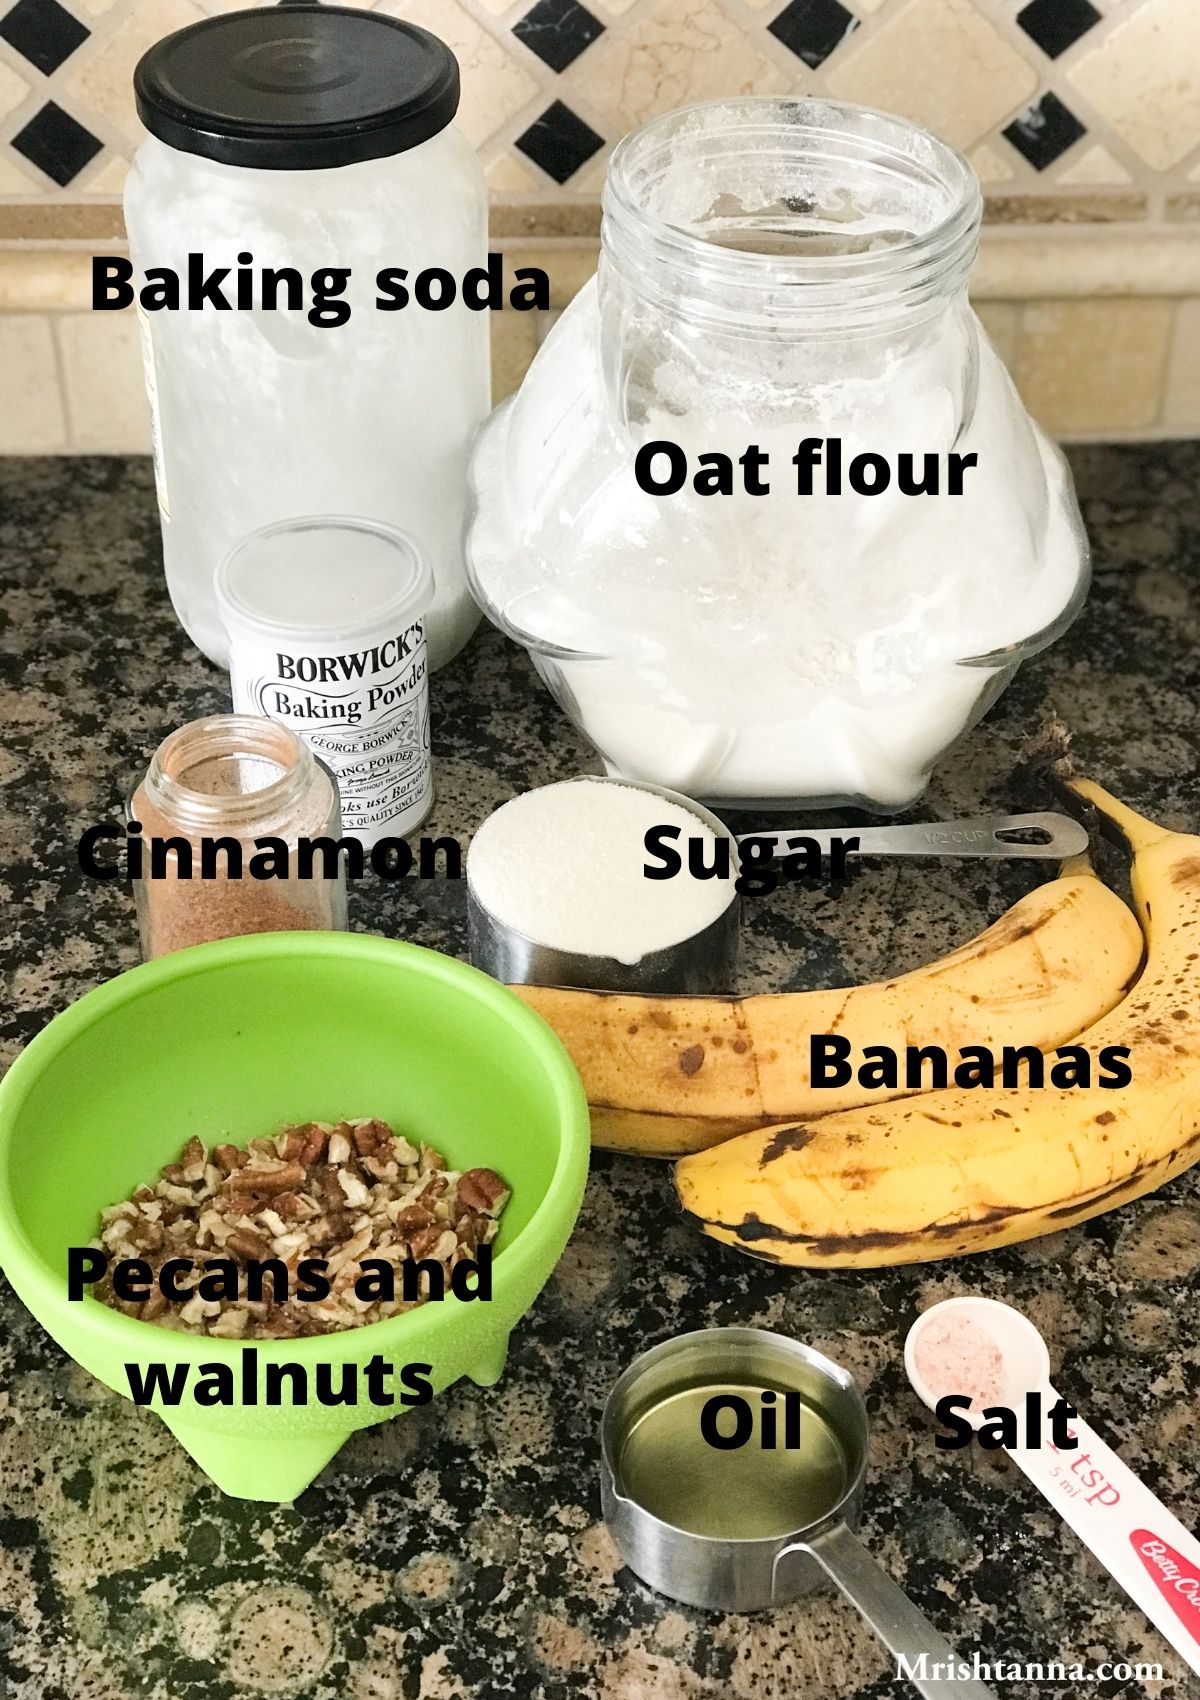 All the ingredients for muffins like oats flour, banana,oil, and sugar are on the surface